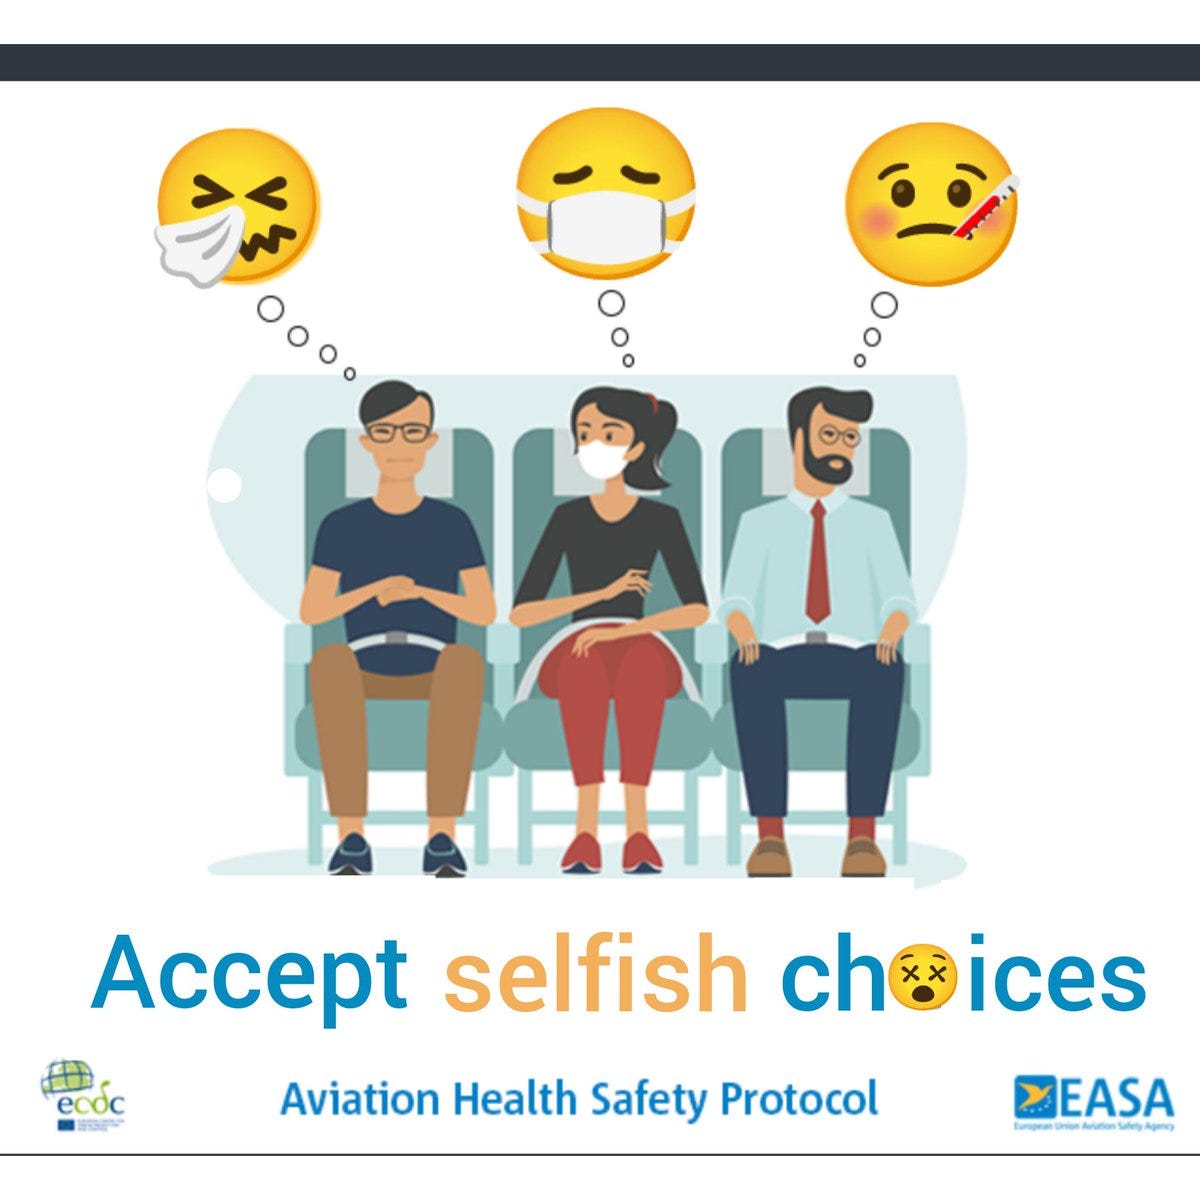 EASA Aviation Health Safety Protocol graphic released for the relaxation of covid19 measures for air travelers shows 3 people sitting in airplane seats only one is masked in the middle and the other 2 are not, and the image has been altered so that the unmasked guy on the left has a sneezing tissue face emoji above him, the woman masked in the middle has a masked face emoji above her head, and the other unmasked man has a sick with thermometer in the mouth emoji above his head and the caption has been altered to say Accept selfish choices, and the O is replaced a dead x eyes emoji